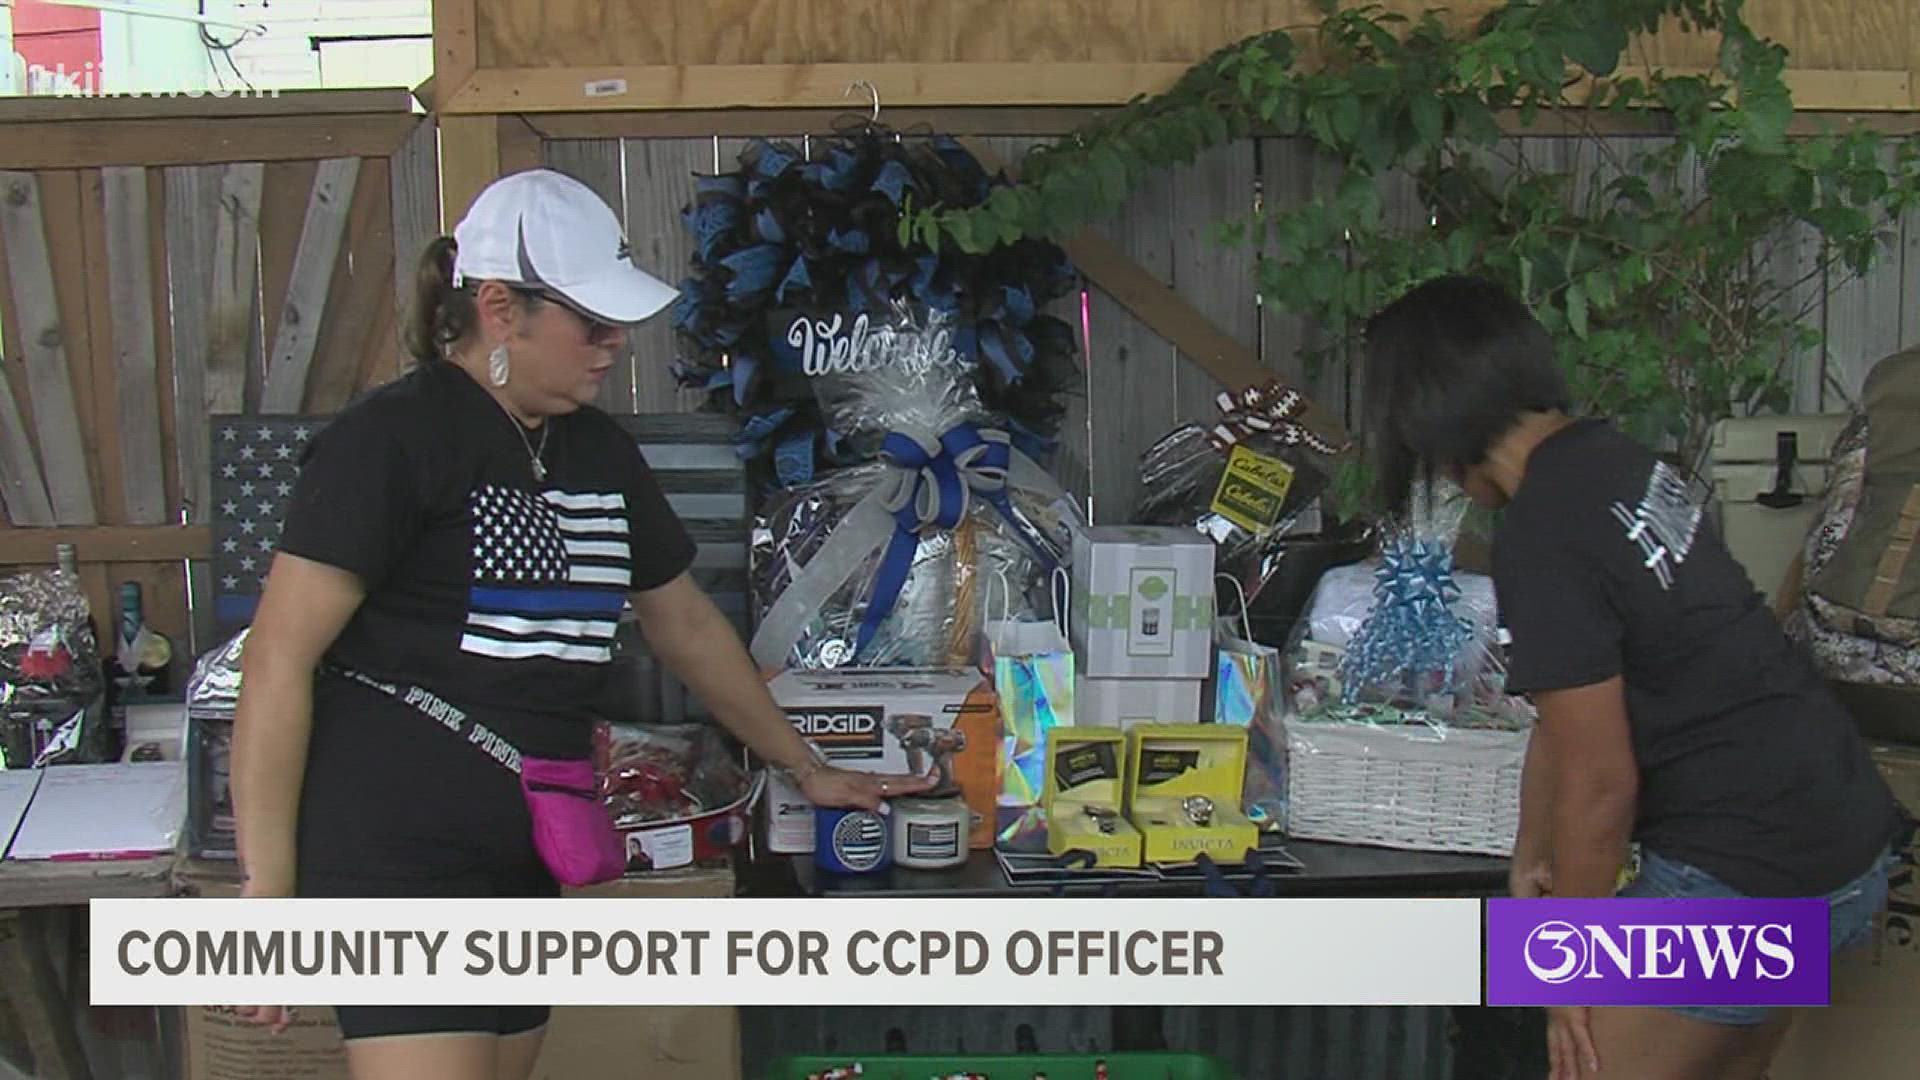 Family, friends, and community members showed up to the fundraising event to show their support to the family.